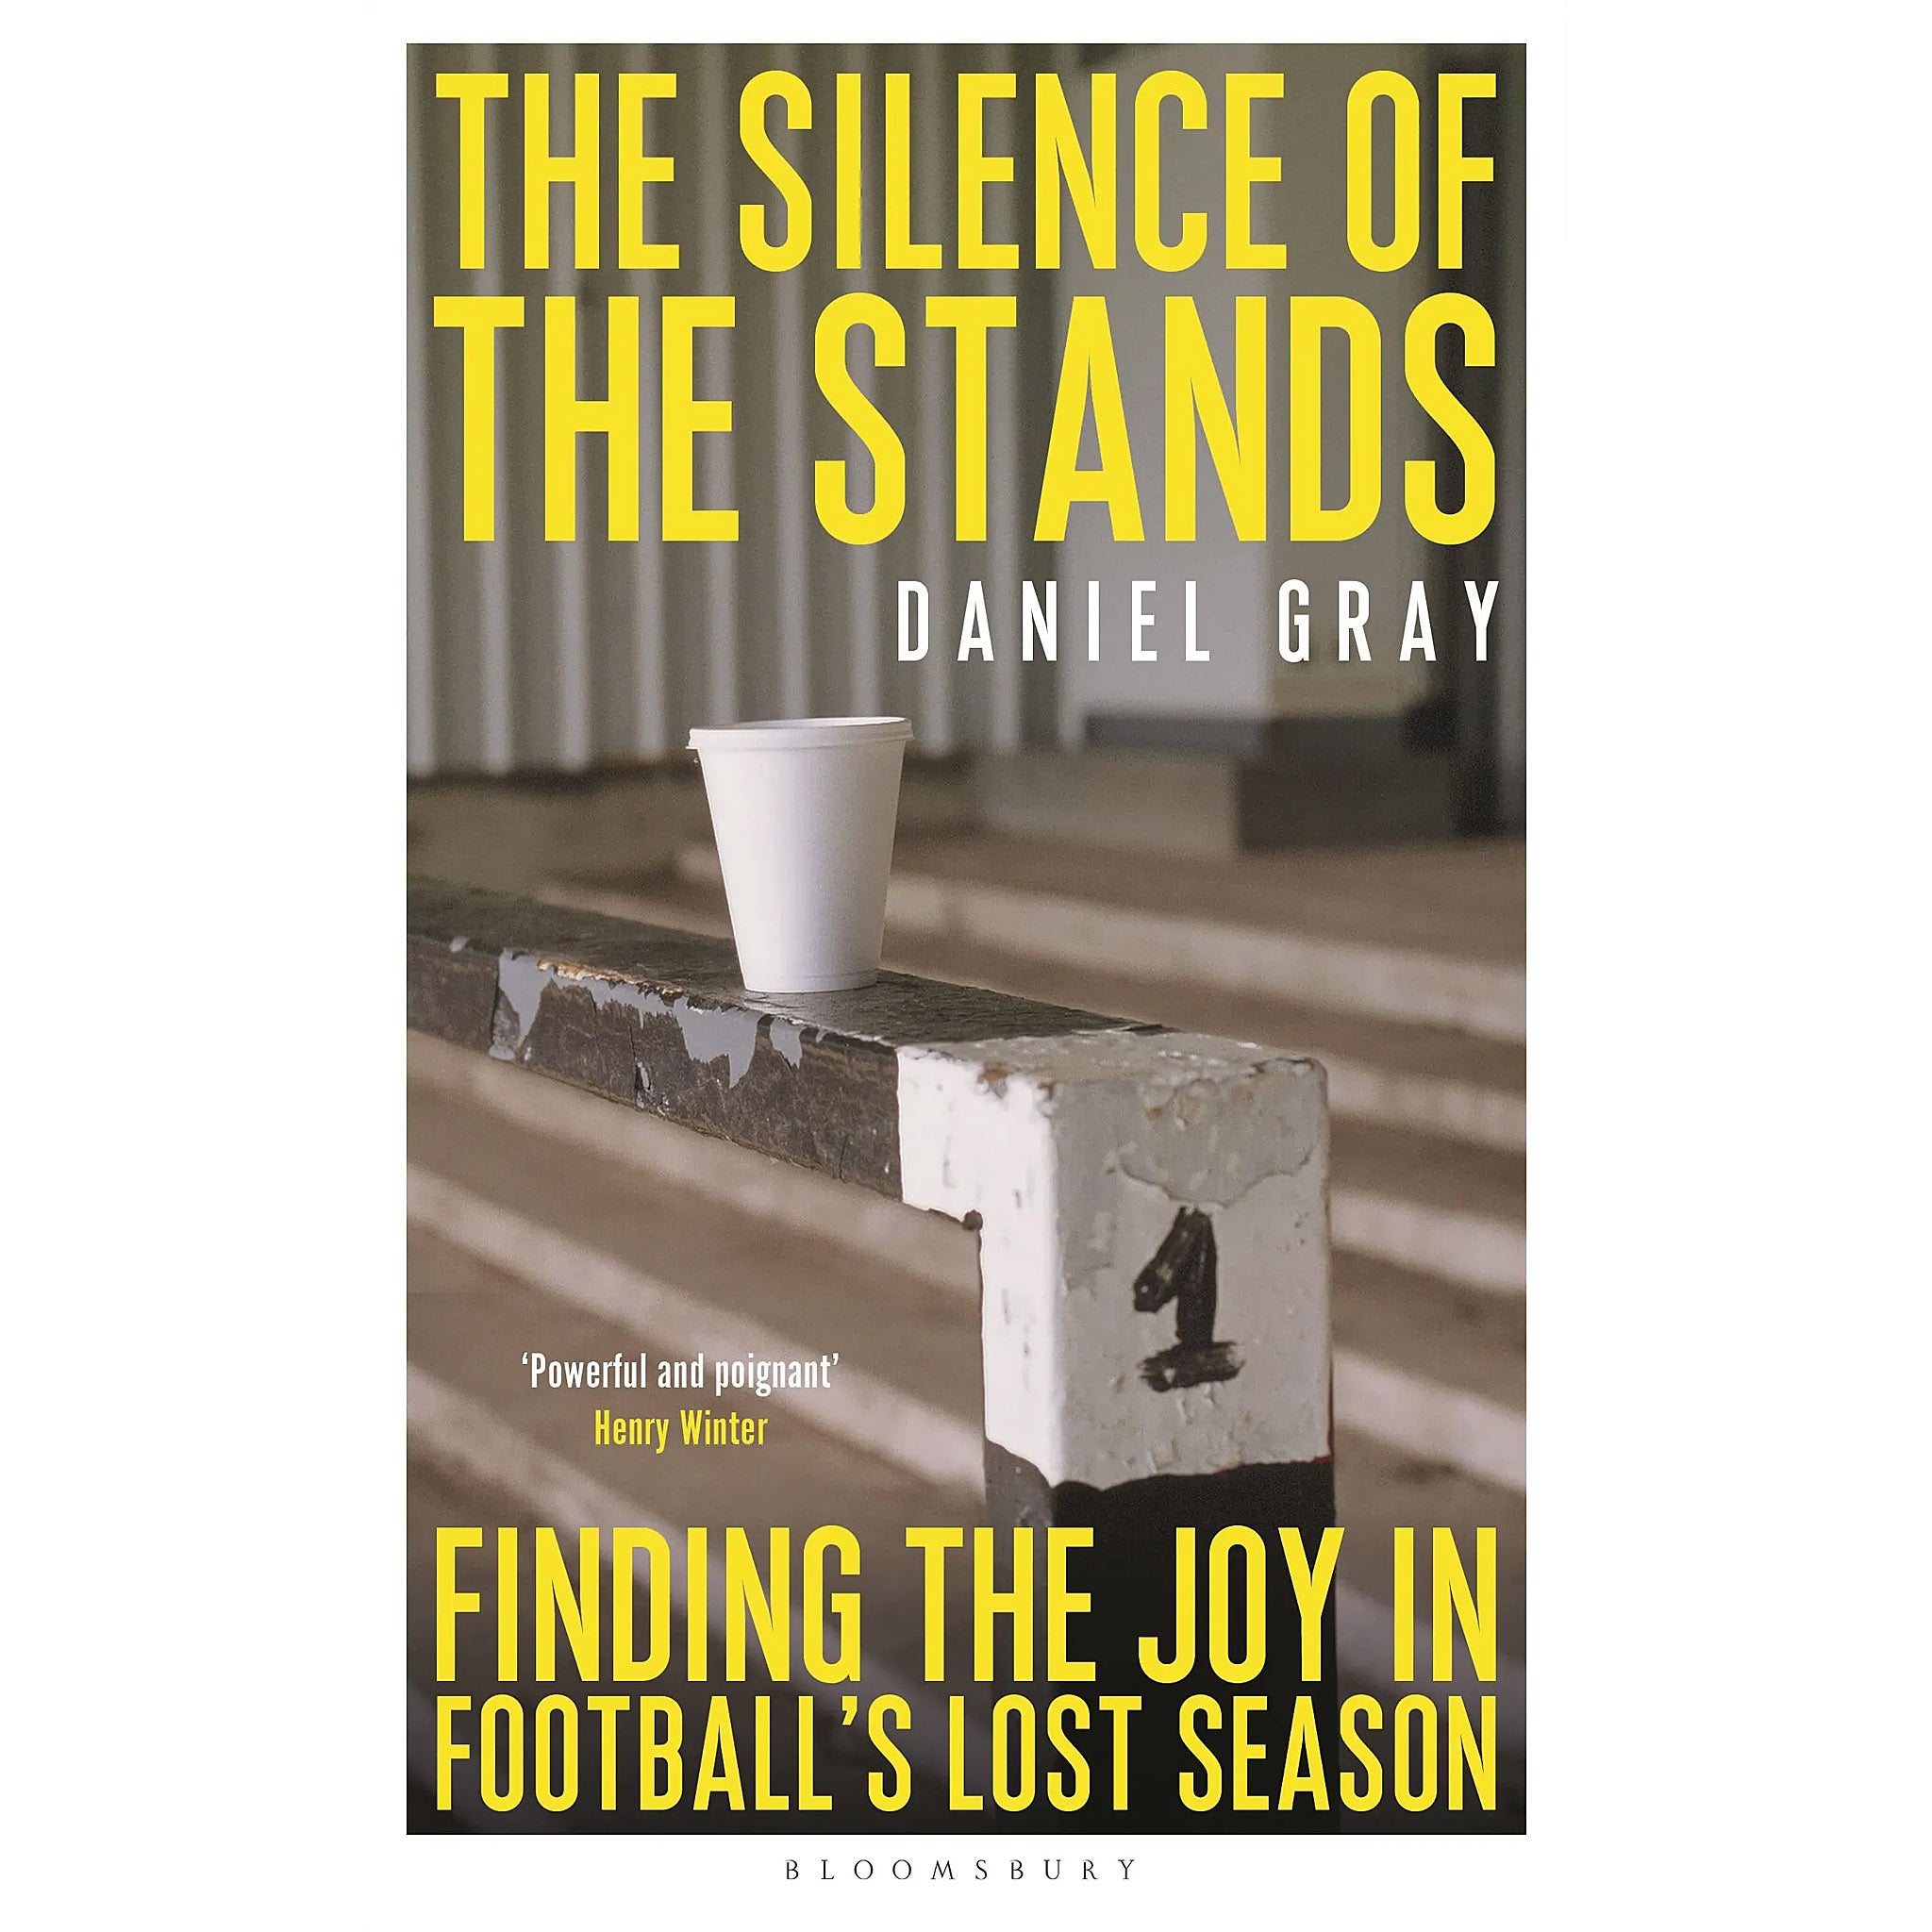 The Silence of the Stands – Finding the Joy in Football's Lost Season